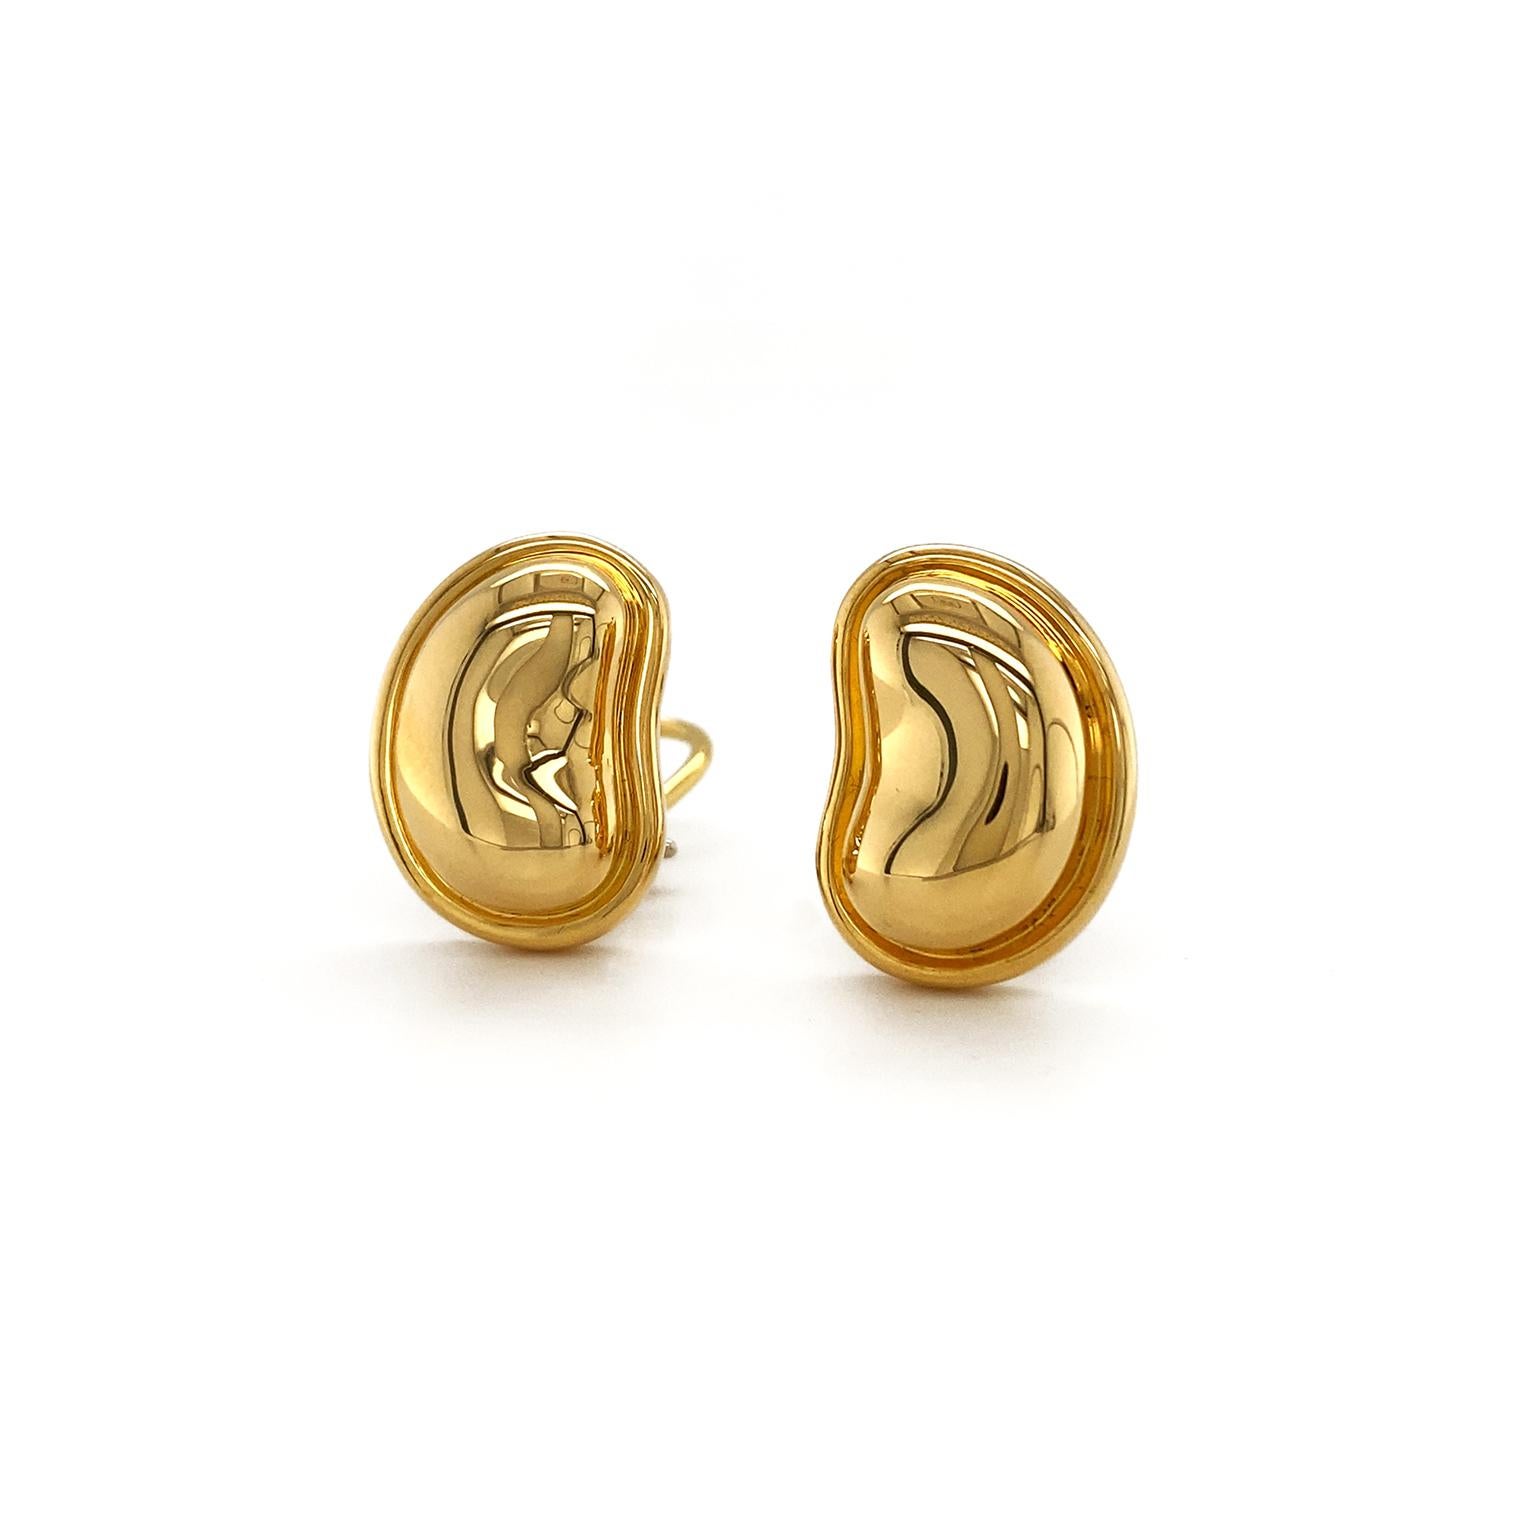 Designed with the unique sculpt of beans in mind, these polished 18k yellow gold earrings scintillate. The overall curve of the beans faces inward and are bezel set. Clip-backs attach the ears to the earrings, which measure 0.54 inches (width) by